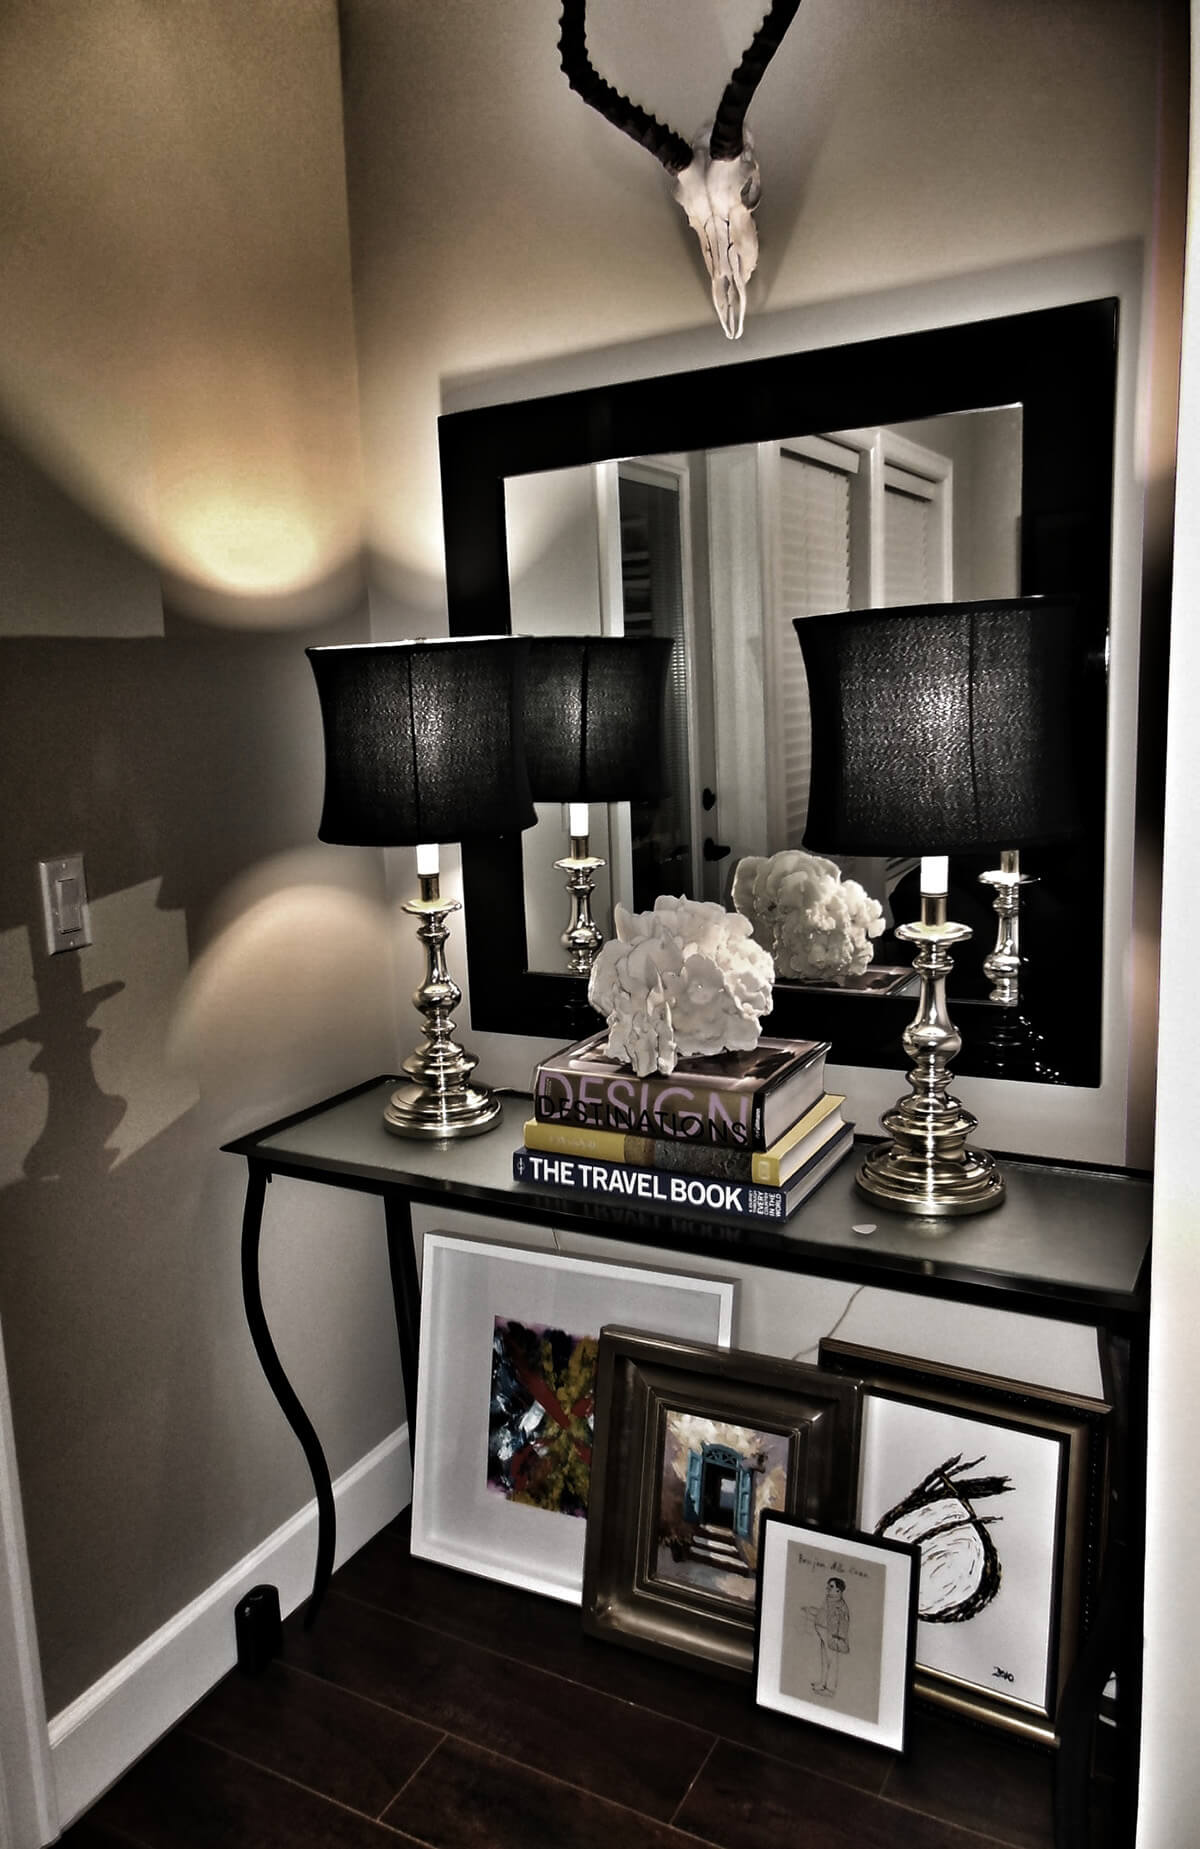 Decorate With Mirrors